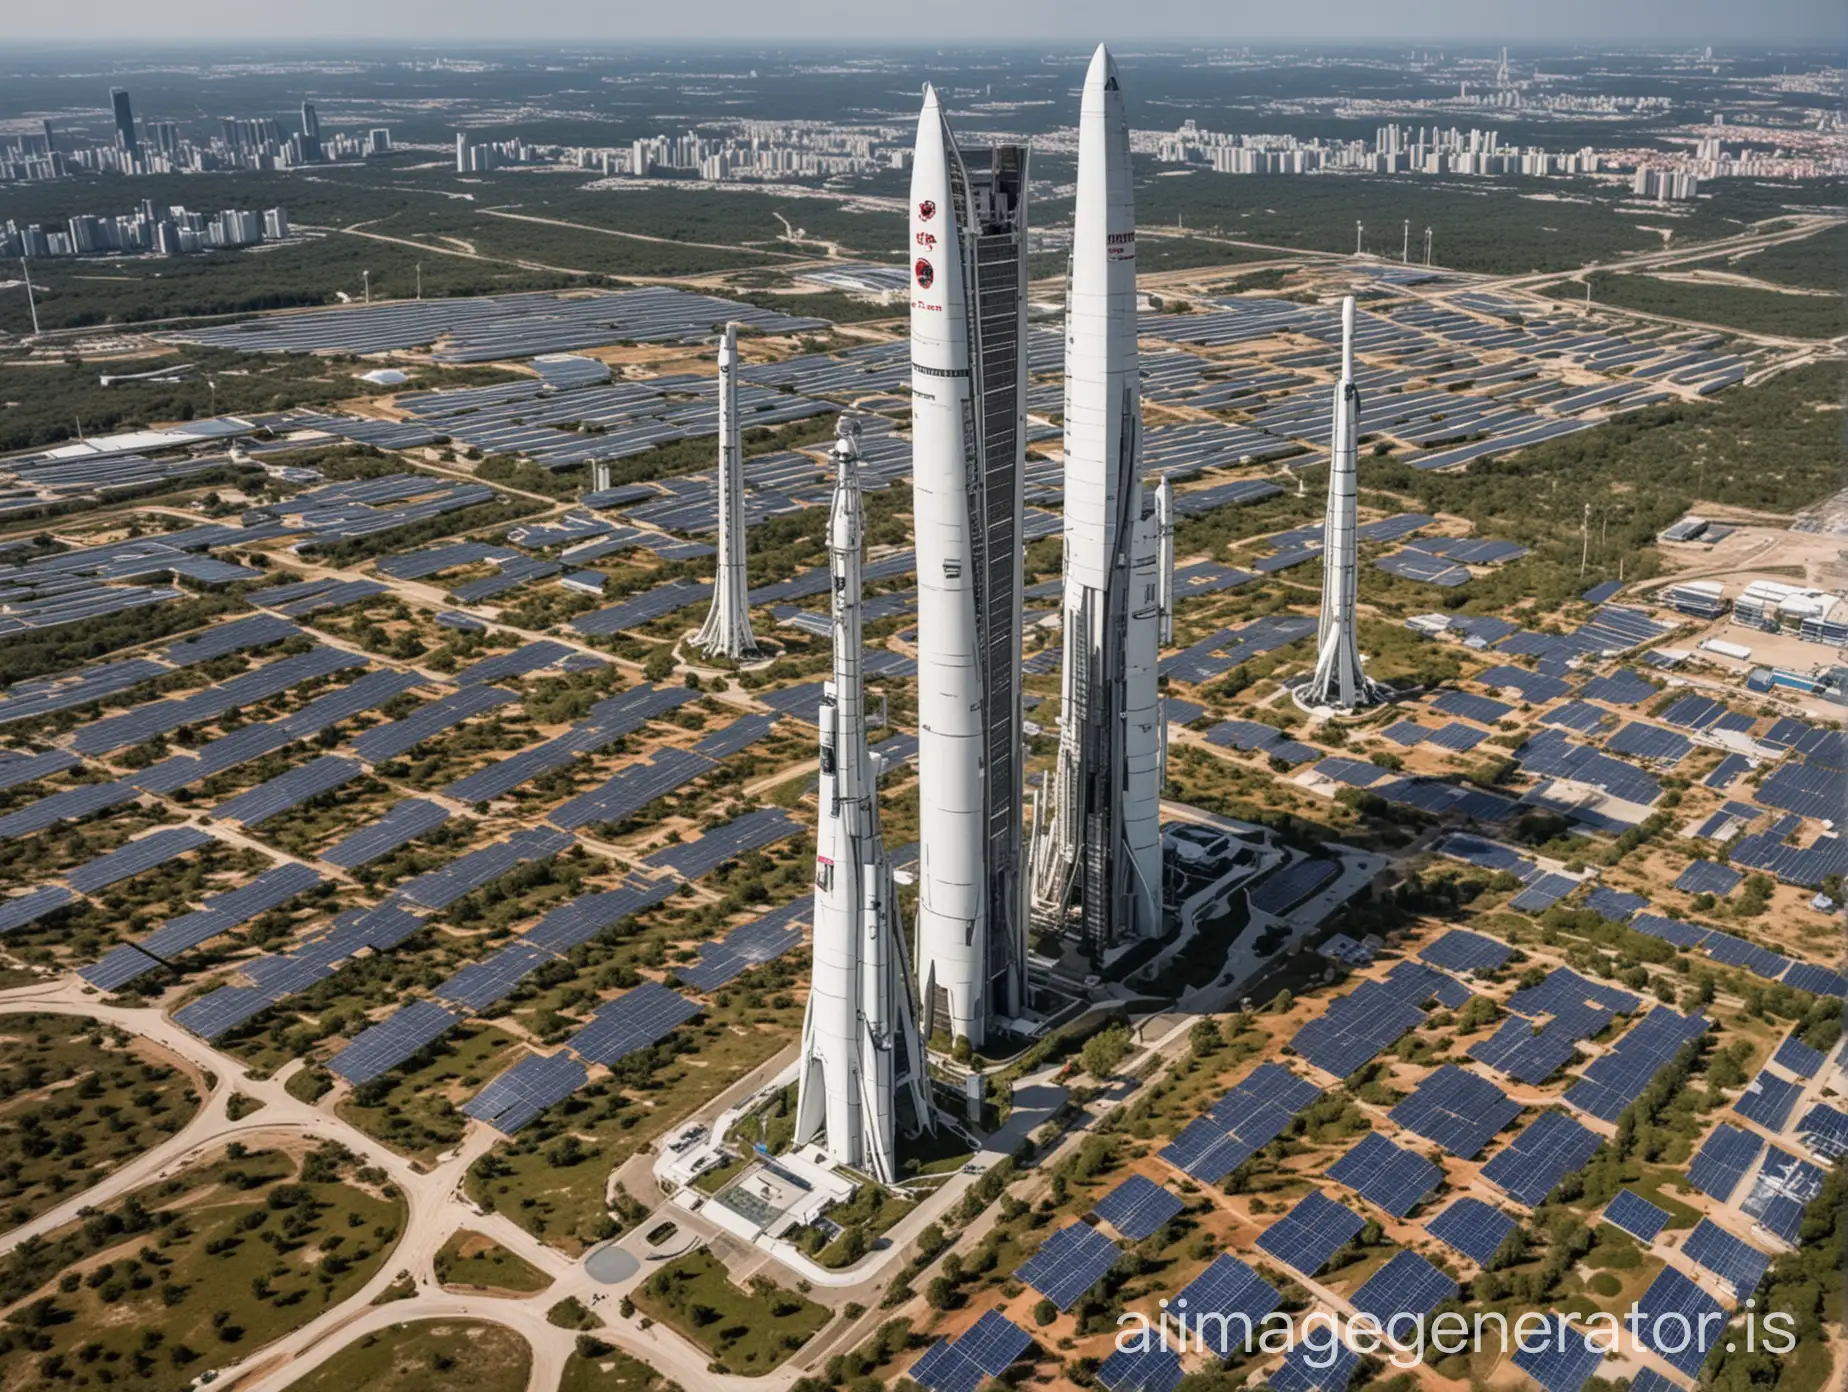 The rocket launch site is surrounded by the largest solar panels in the world and there are futuristic skyscrapers with gardens in each building and with a planet and space in the background.